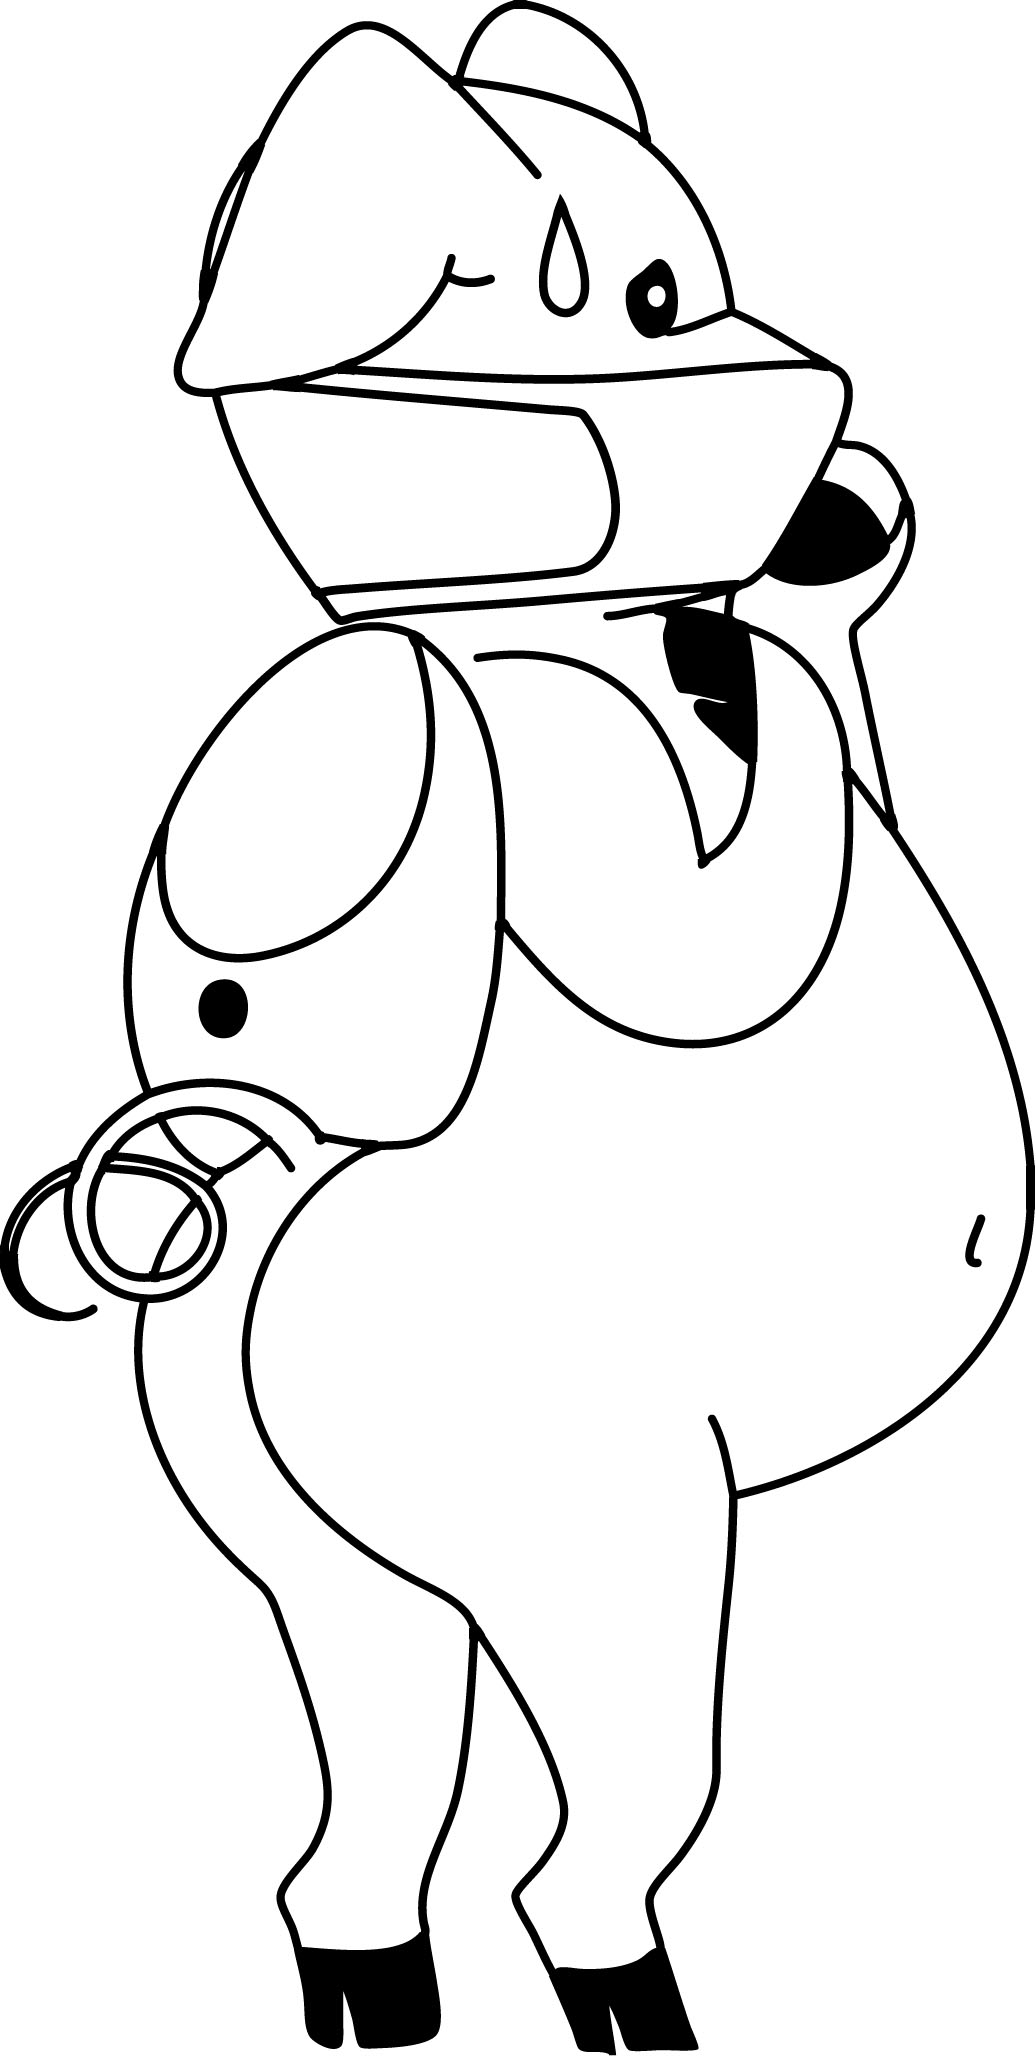 h1n1 flu coloring pages - photo #39